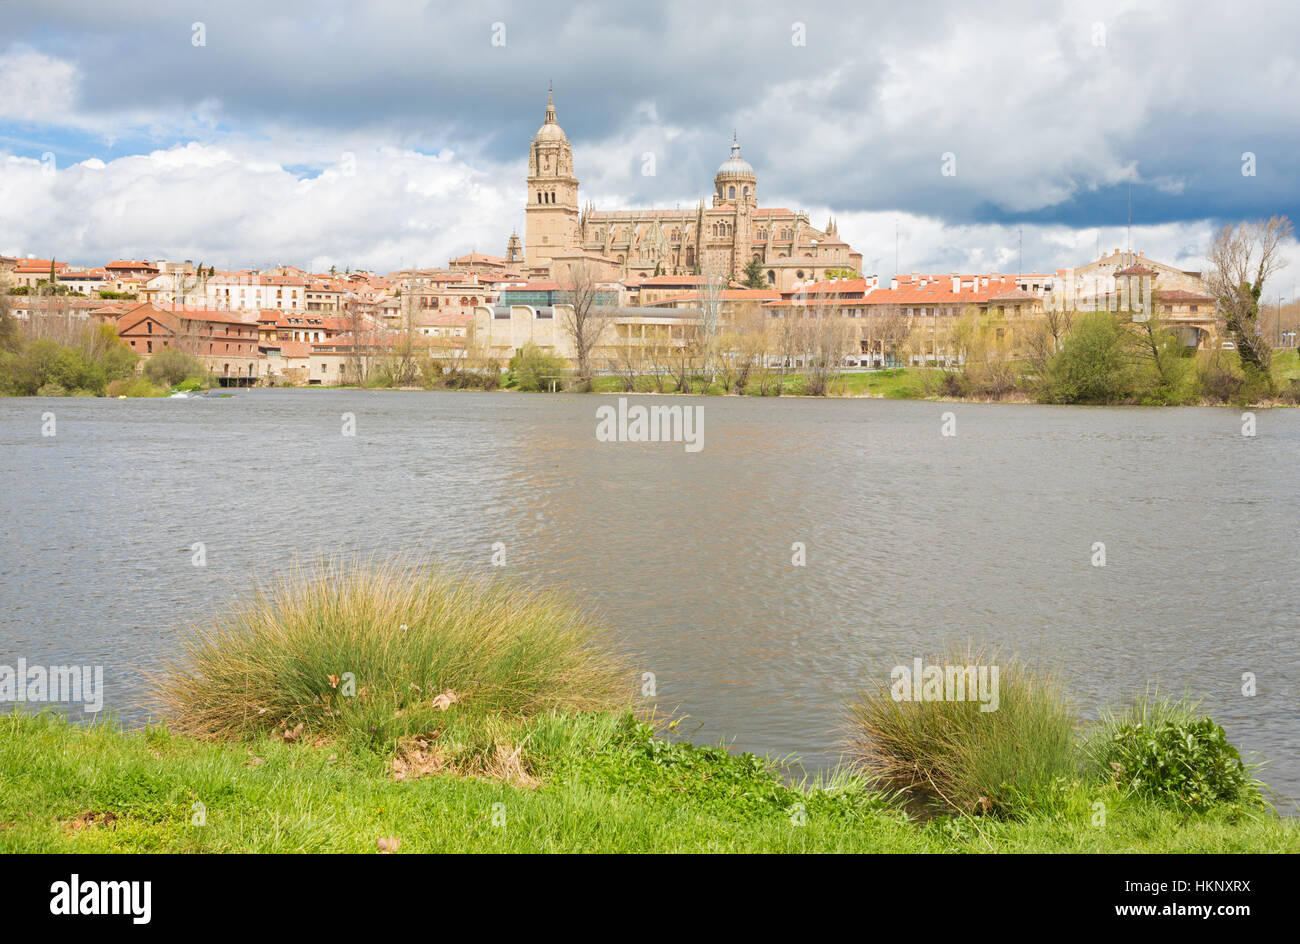 Salamanca - The Town, Cathedral and the Rio Tormes river. Stock Photo